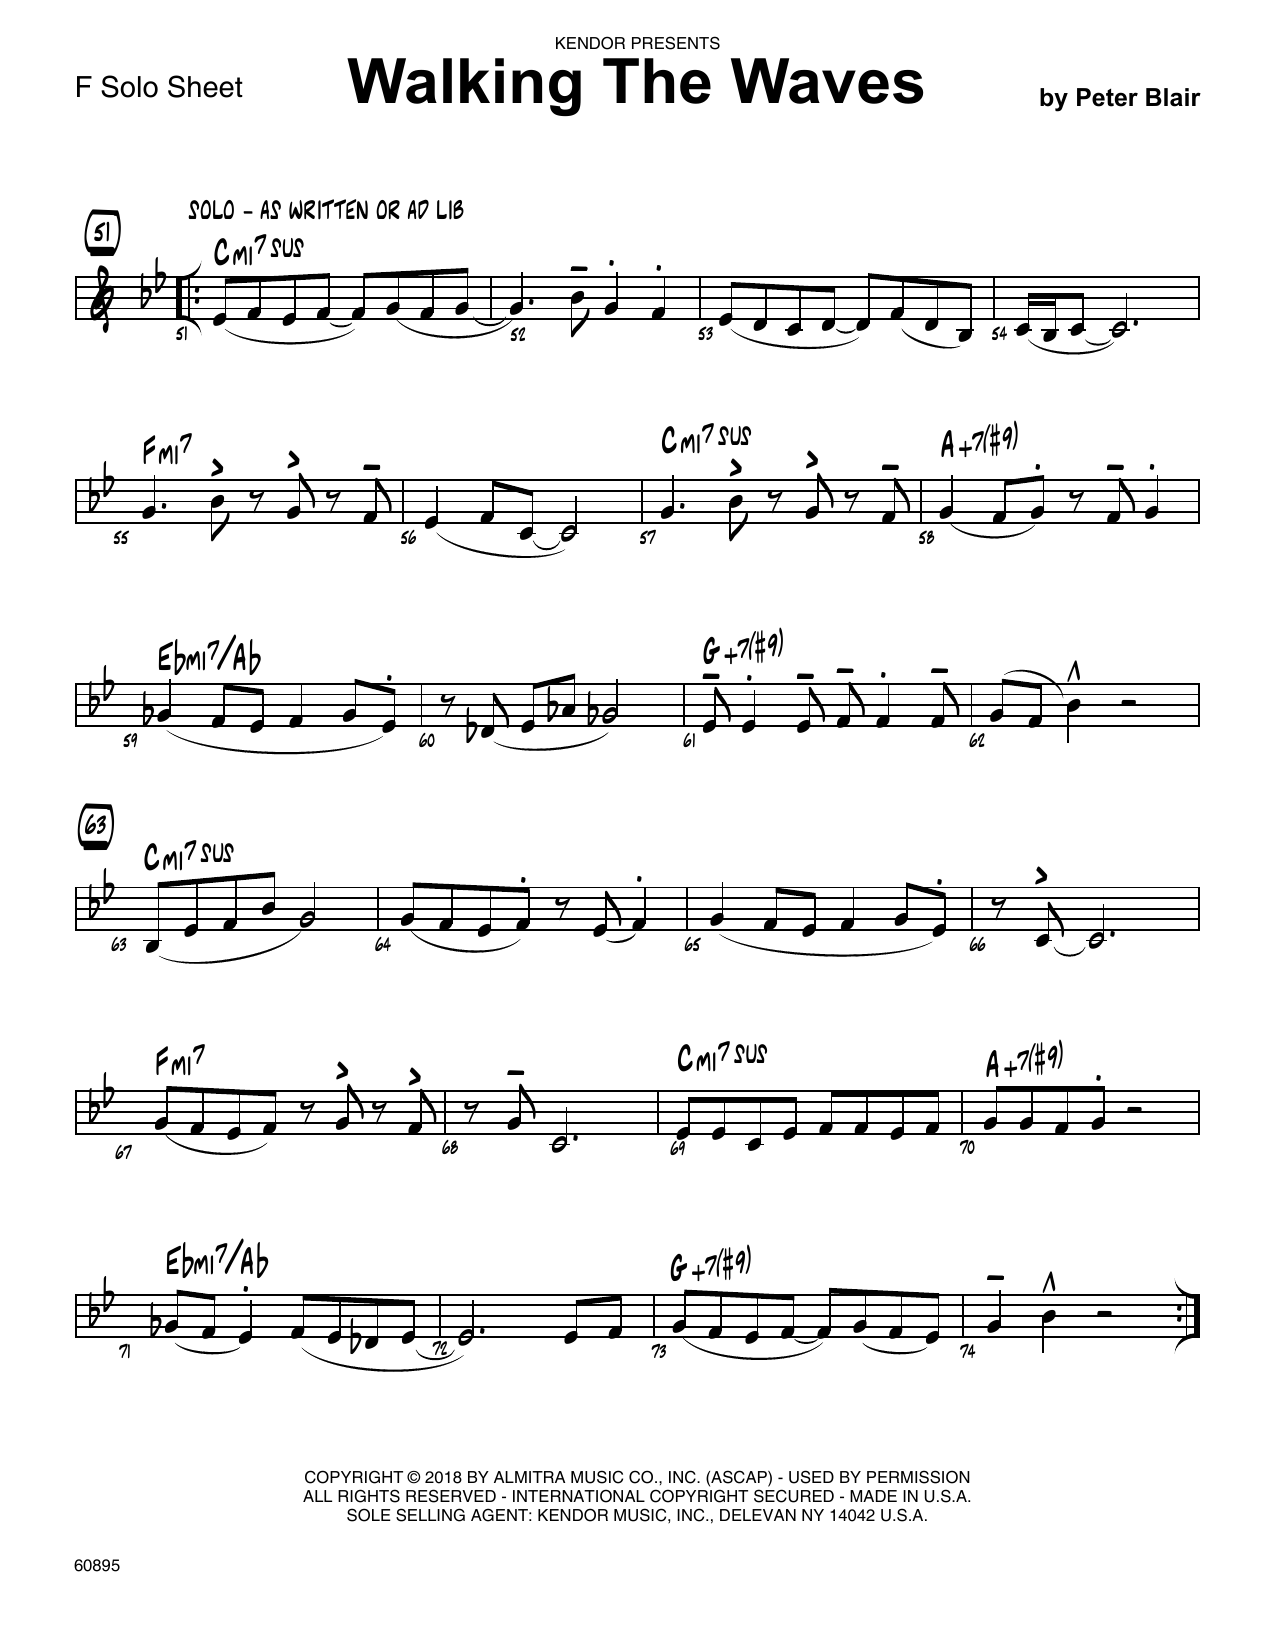 Download Peter Blair Walking The Waves - Solo Sheet for F In Sheet Music